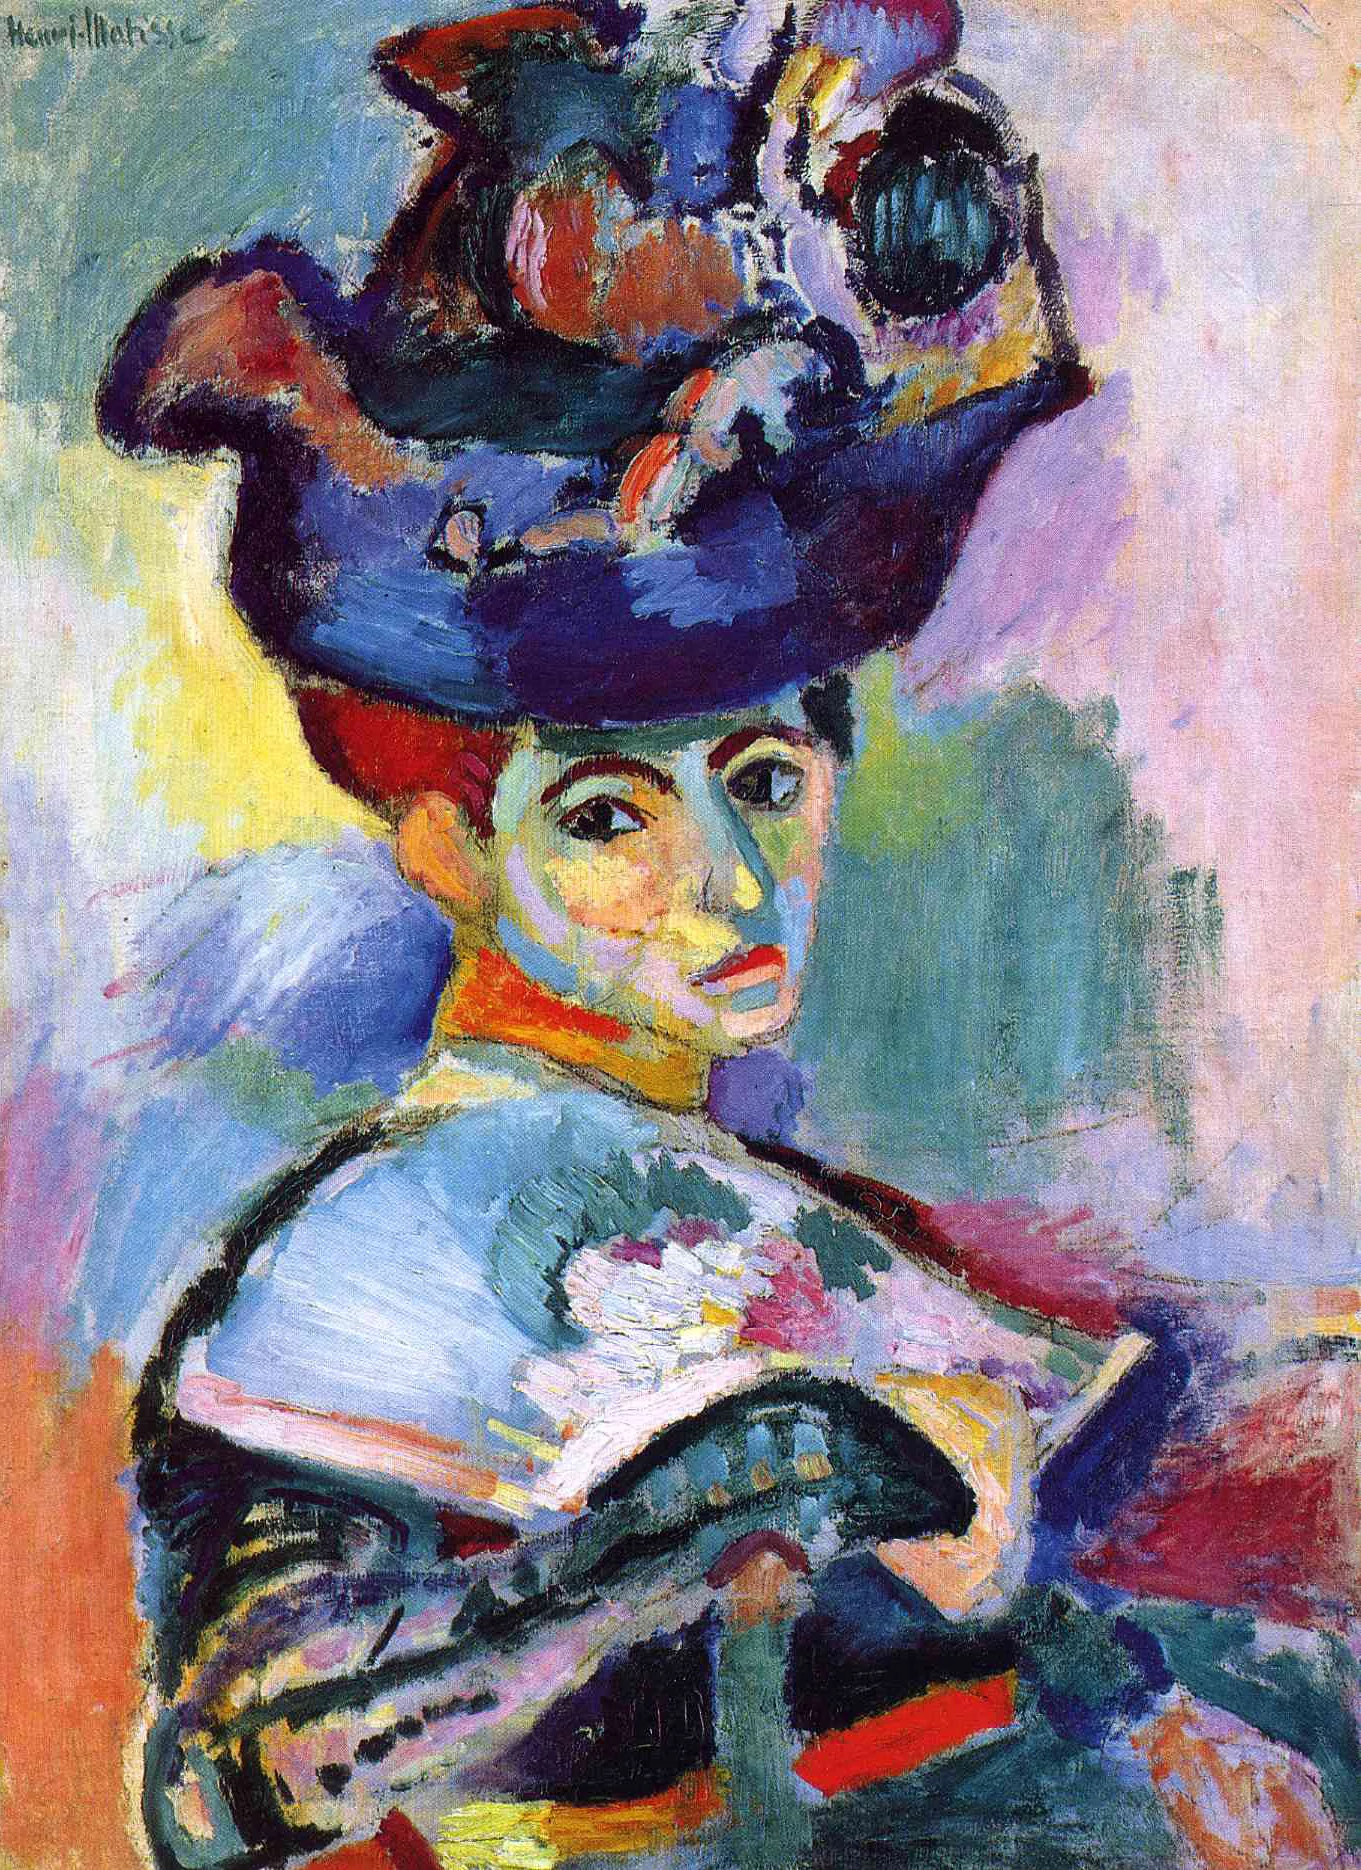 The Woman with a Hat, Henri Matisse